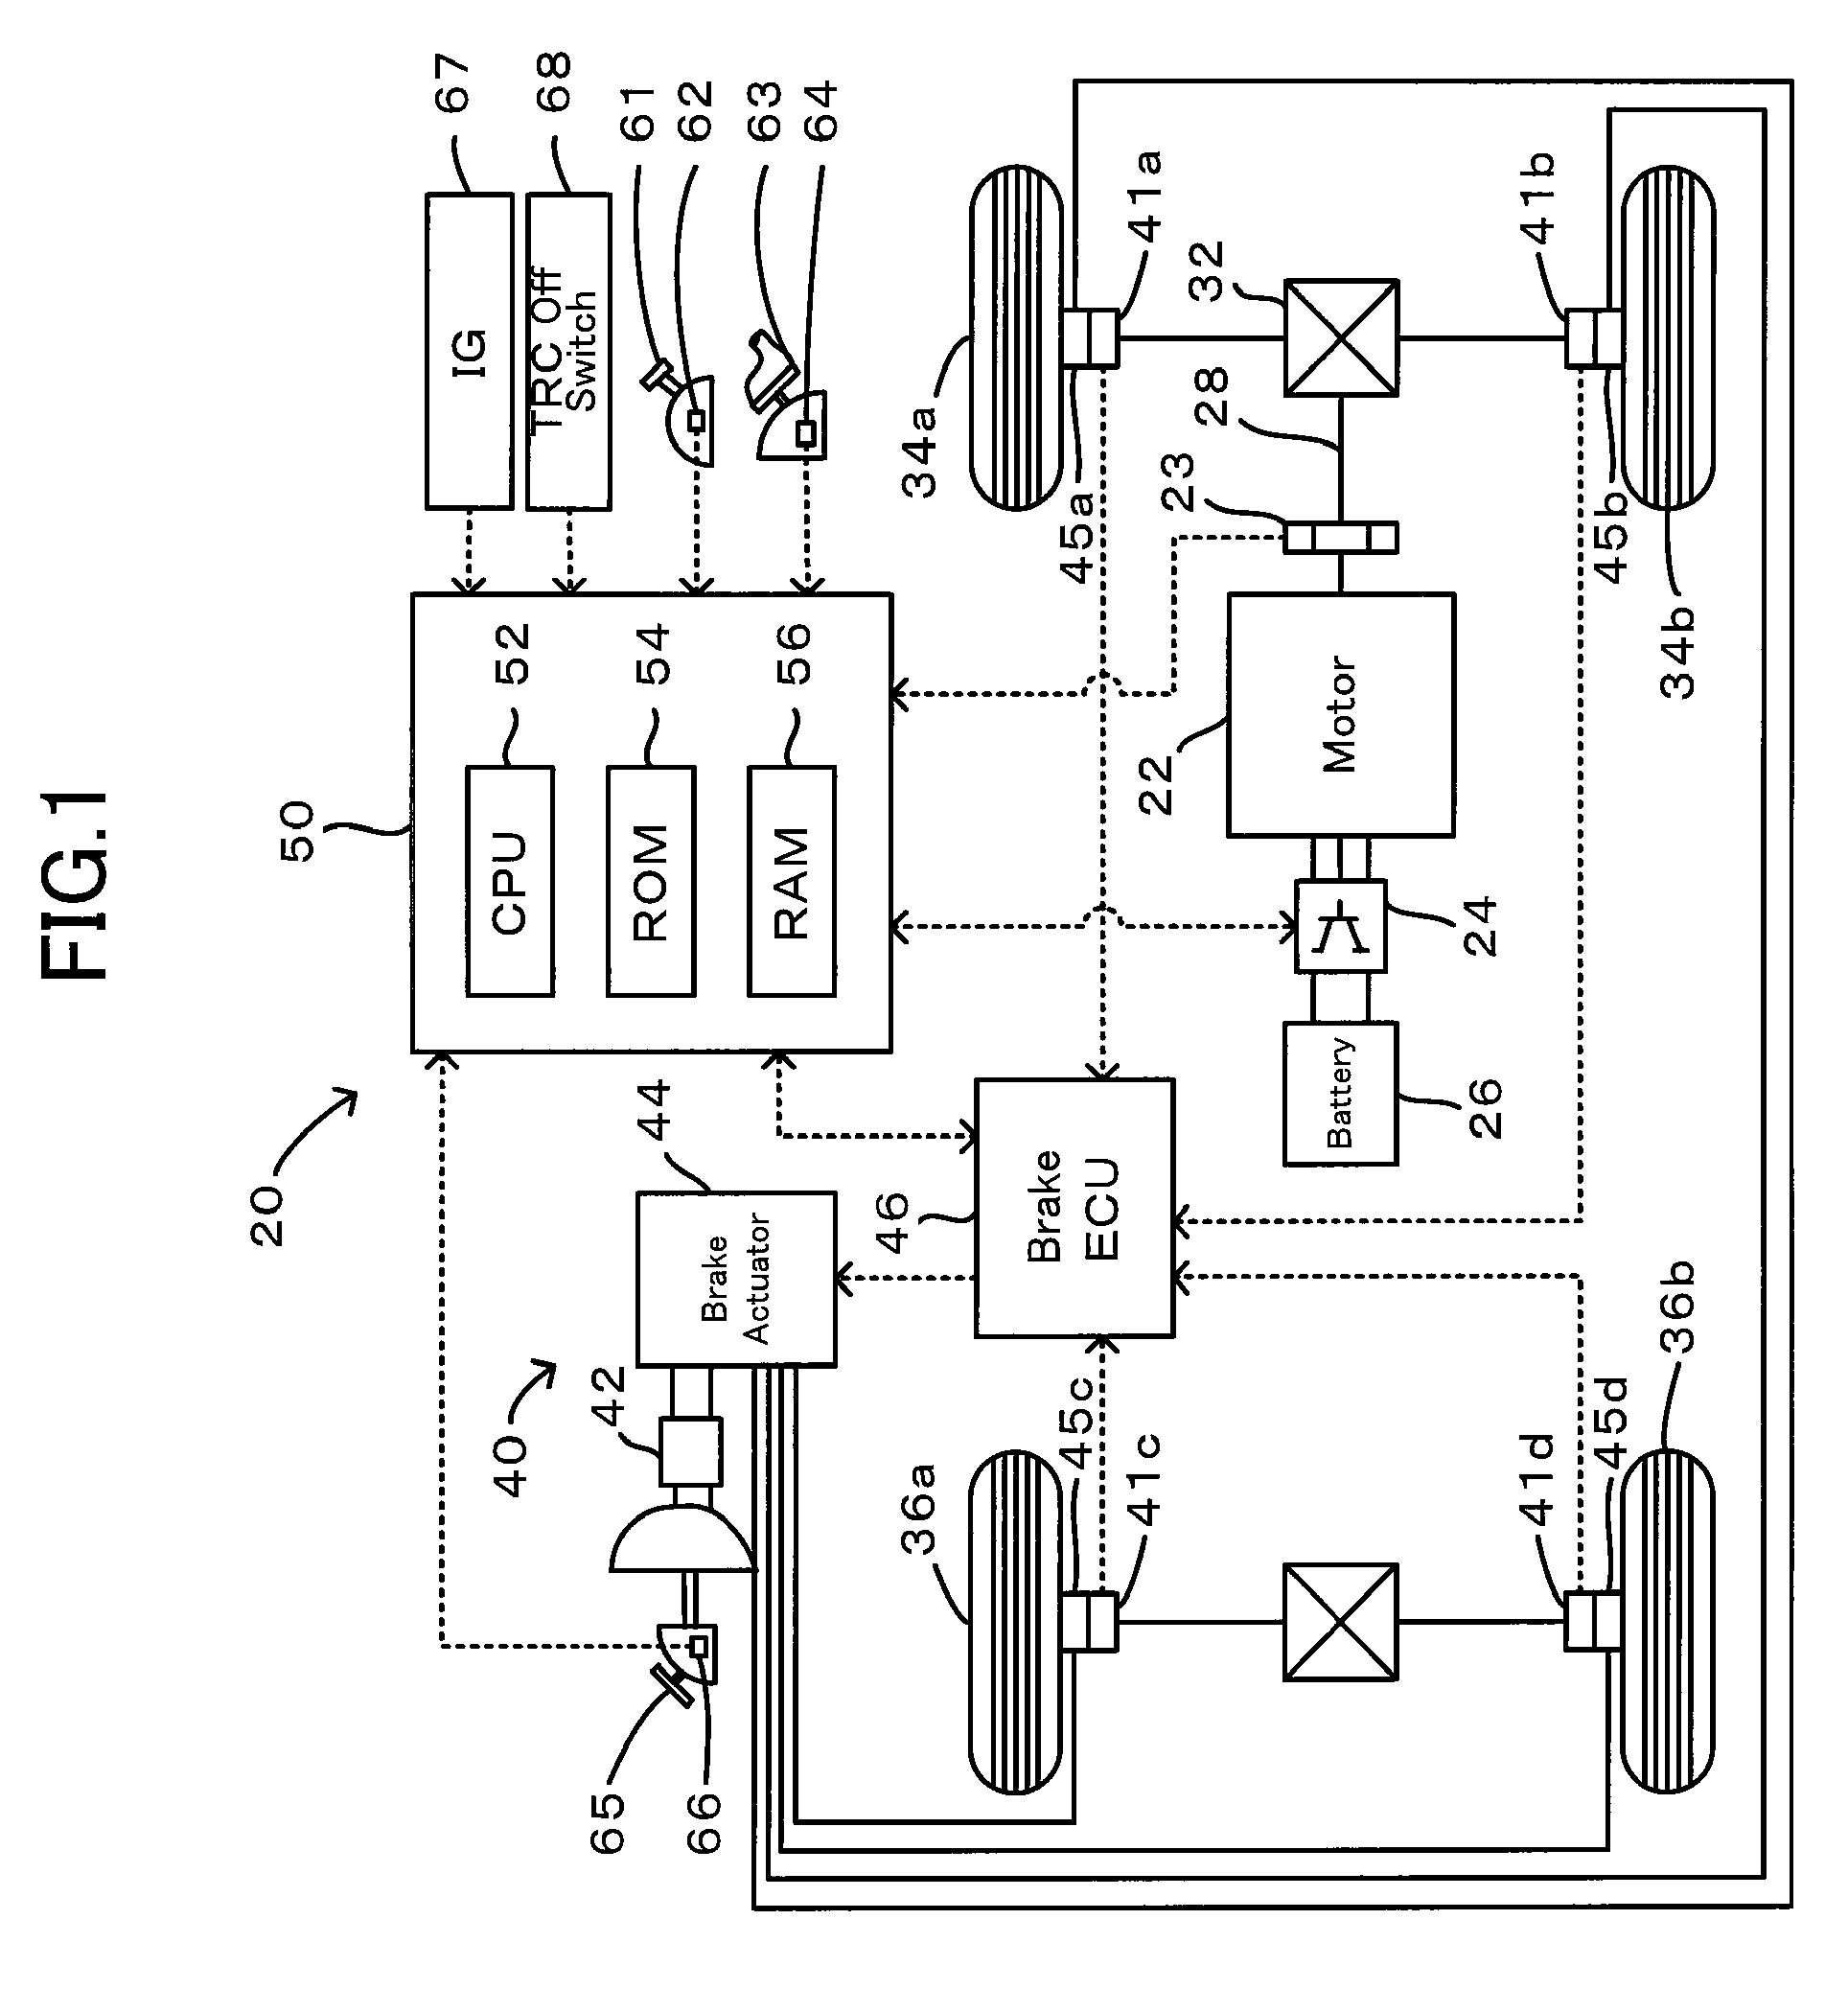 Vehicle and method of controlling driving force for the vehicle based on detected slip of the drive wheel